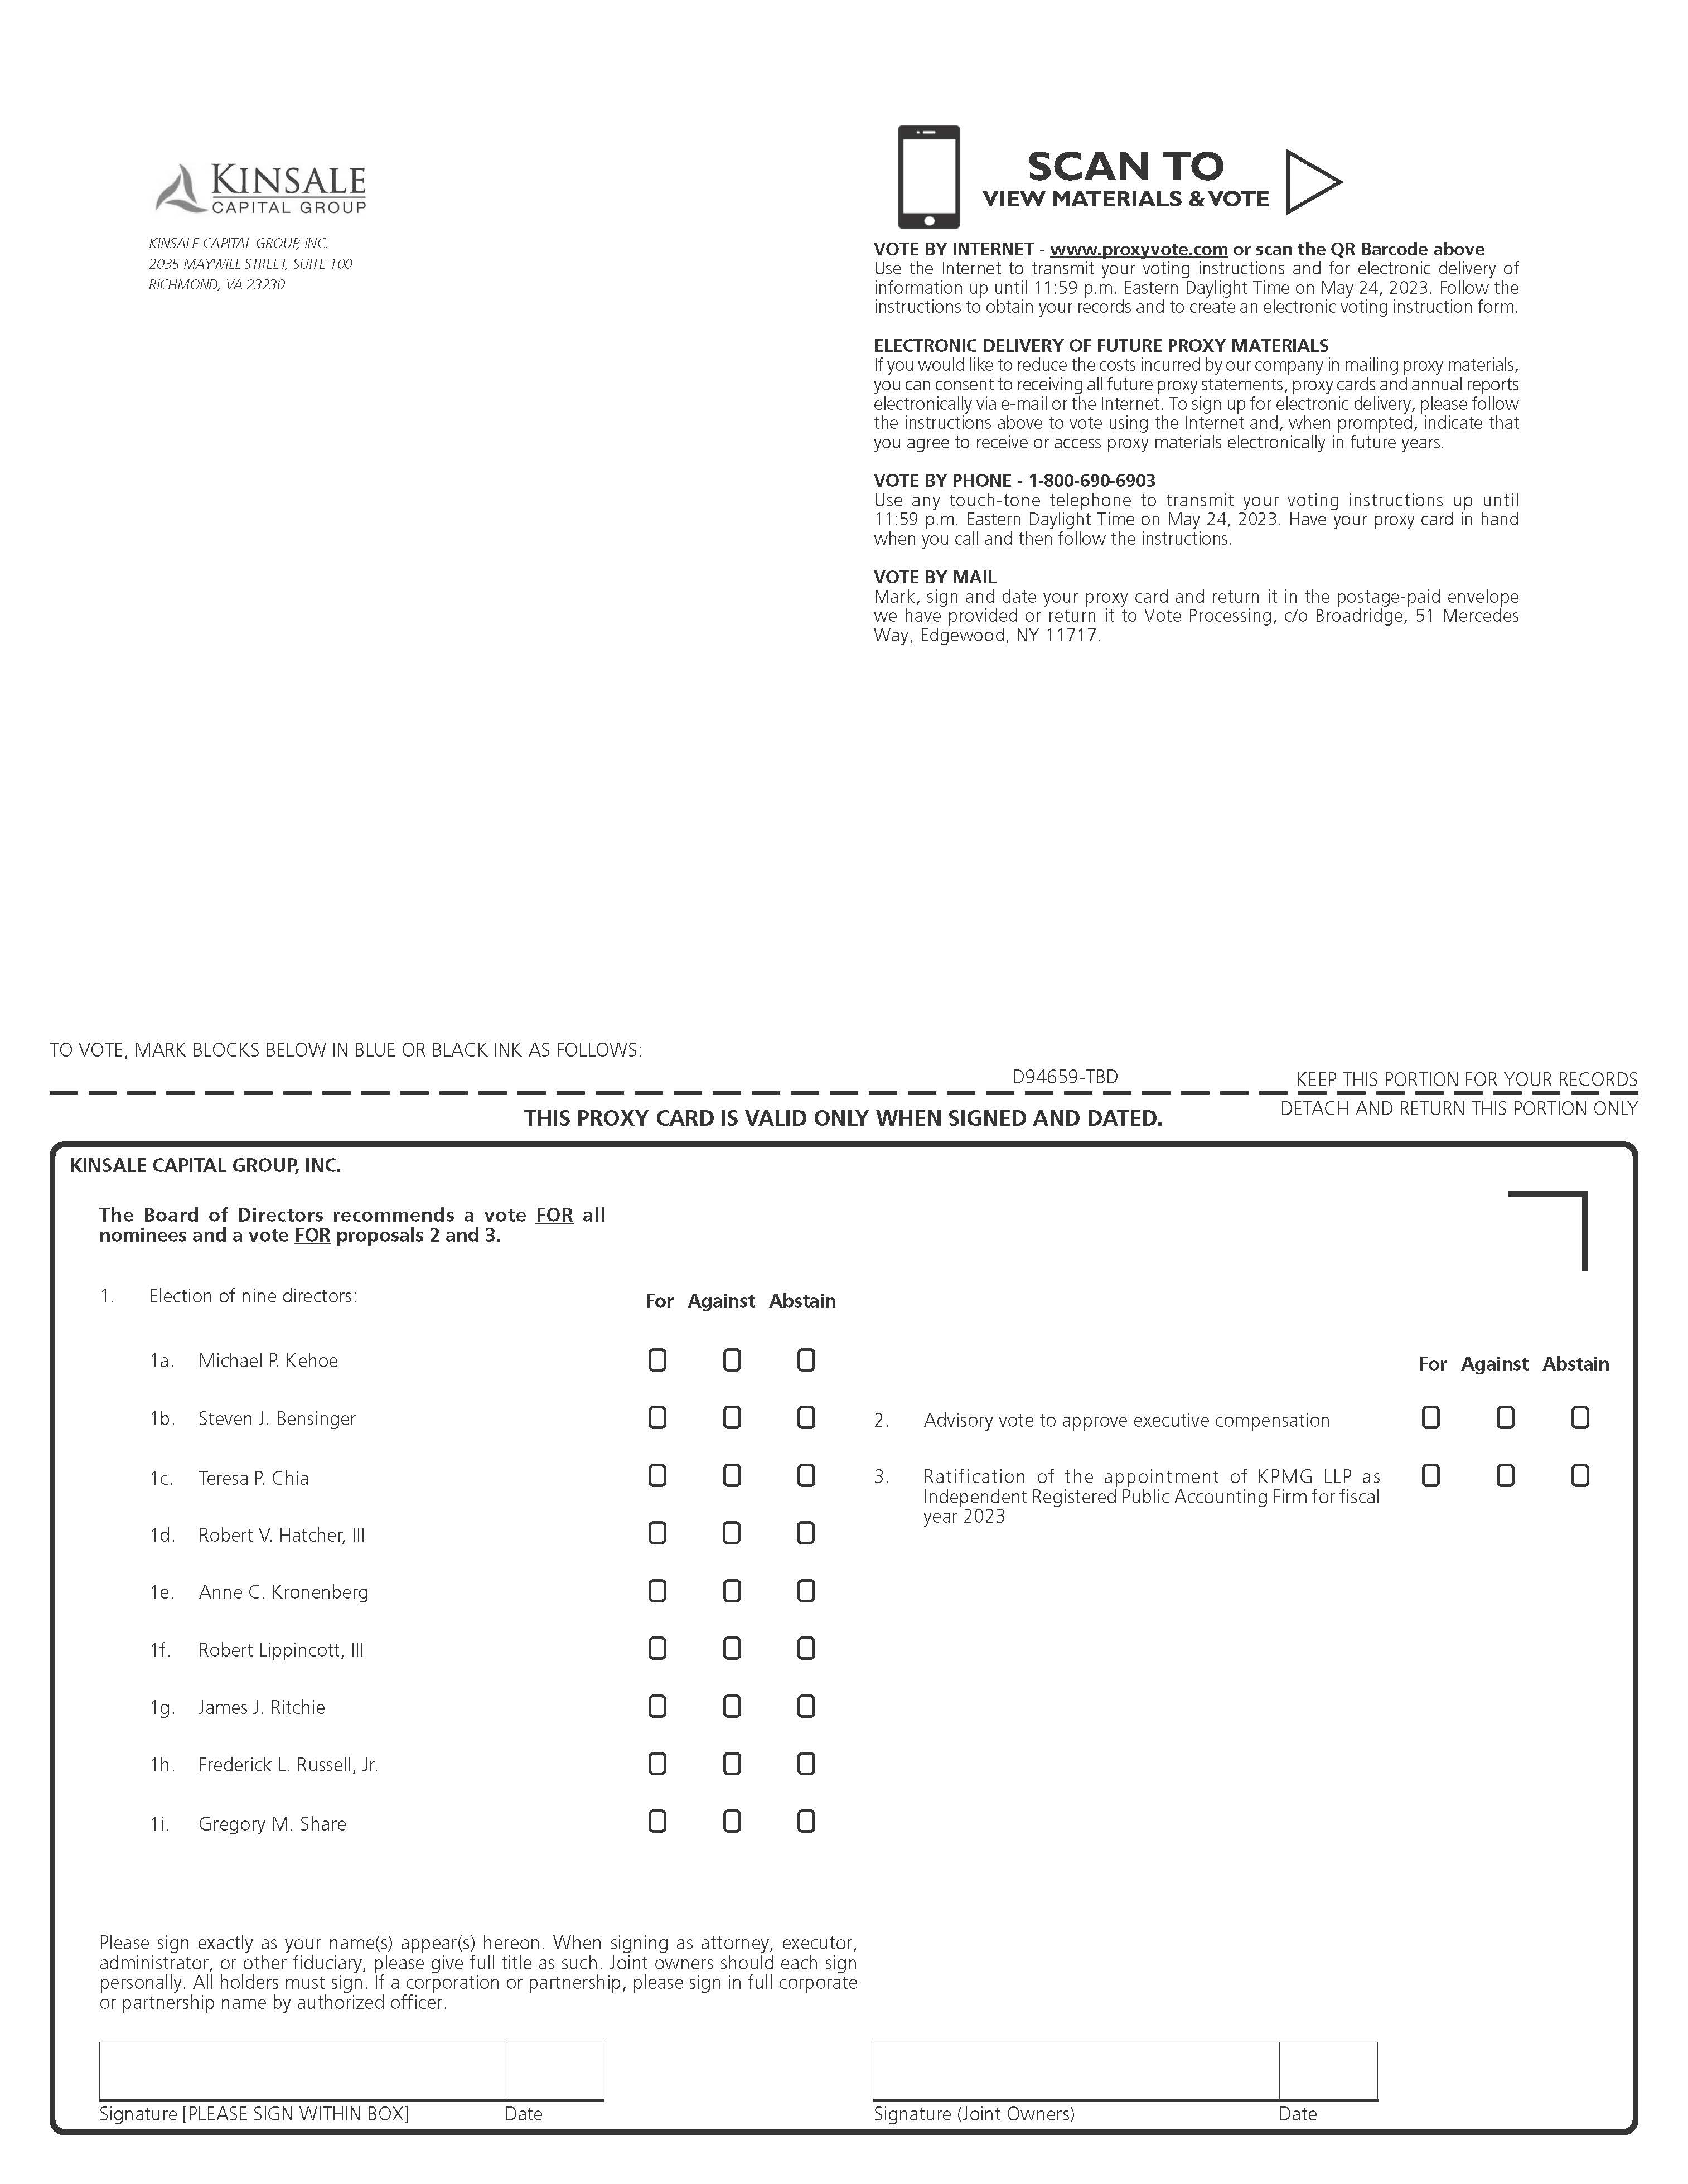 Pages from KINSALE CAPITAL GROUP INC._PRXY__GT20_P84047_23(#66598) - CC.jpg